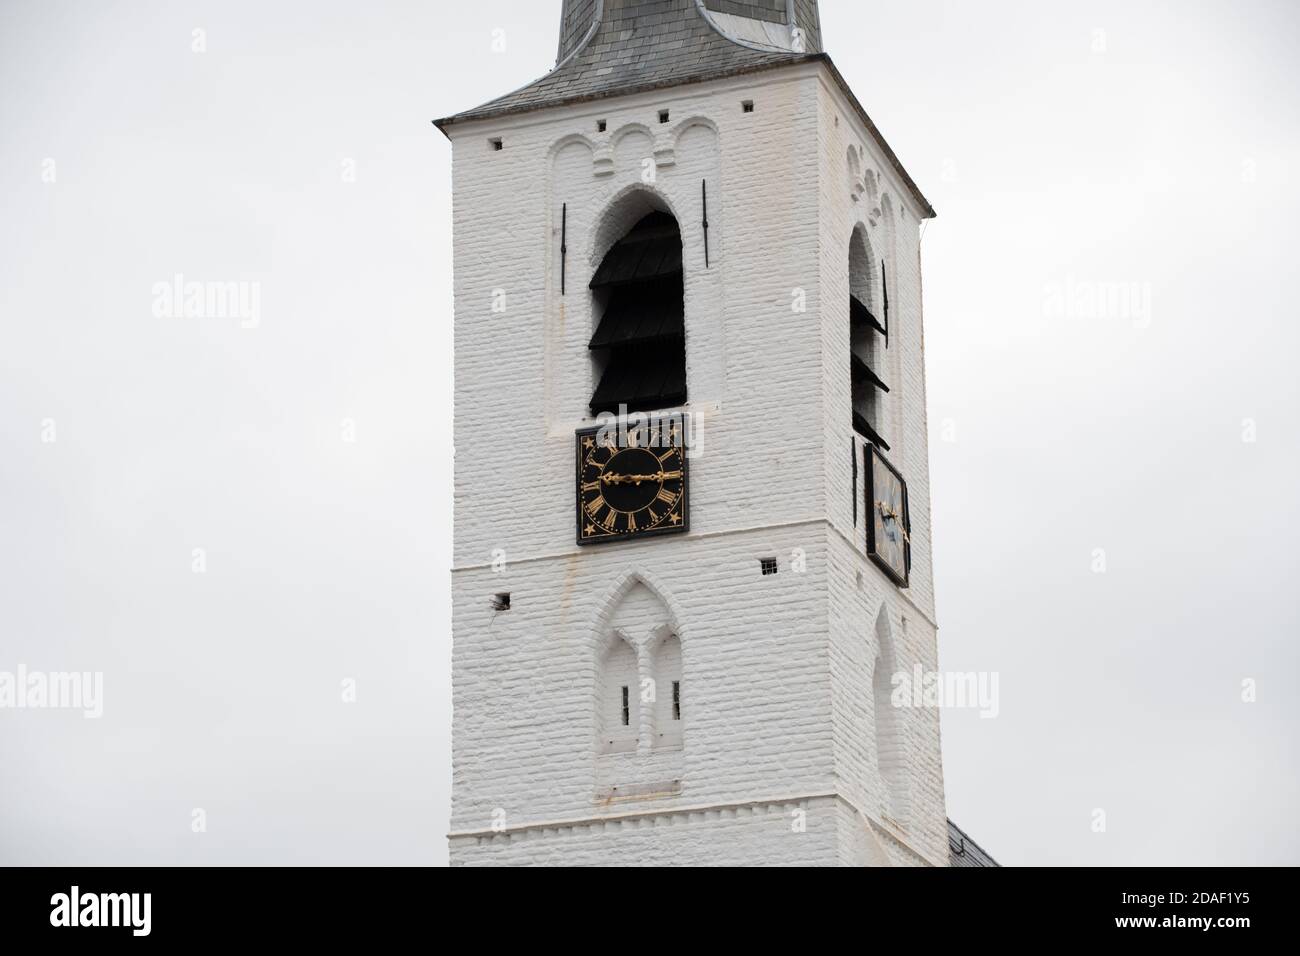 White church in Noordwijkerhout in the Netherlands with cloudy sky Stock Photo